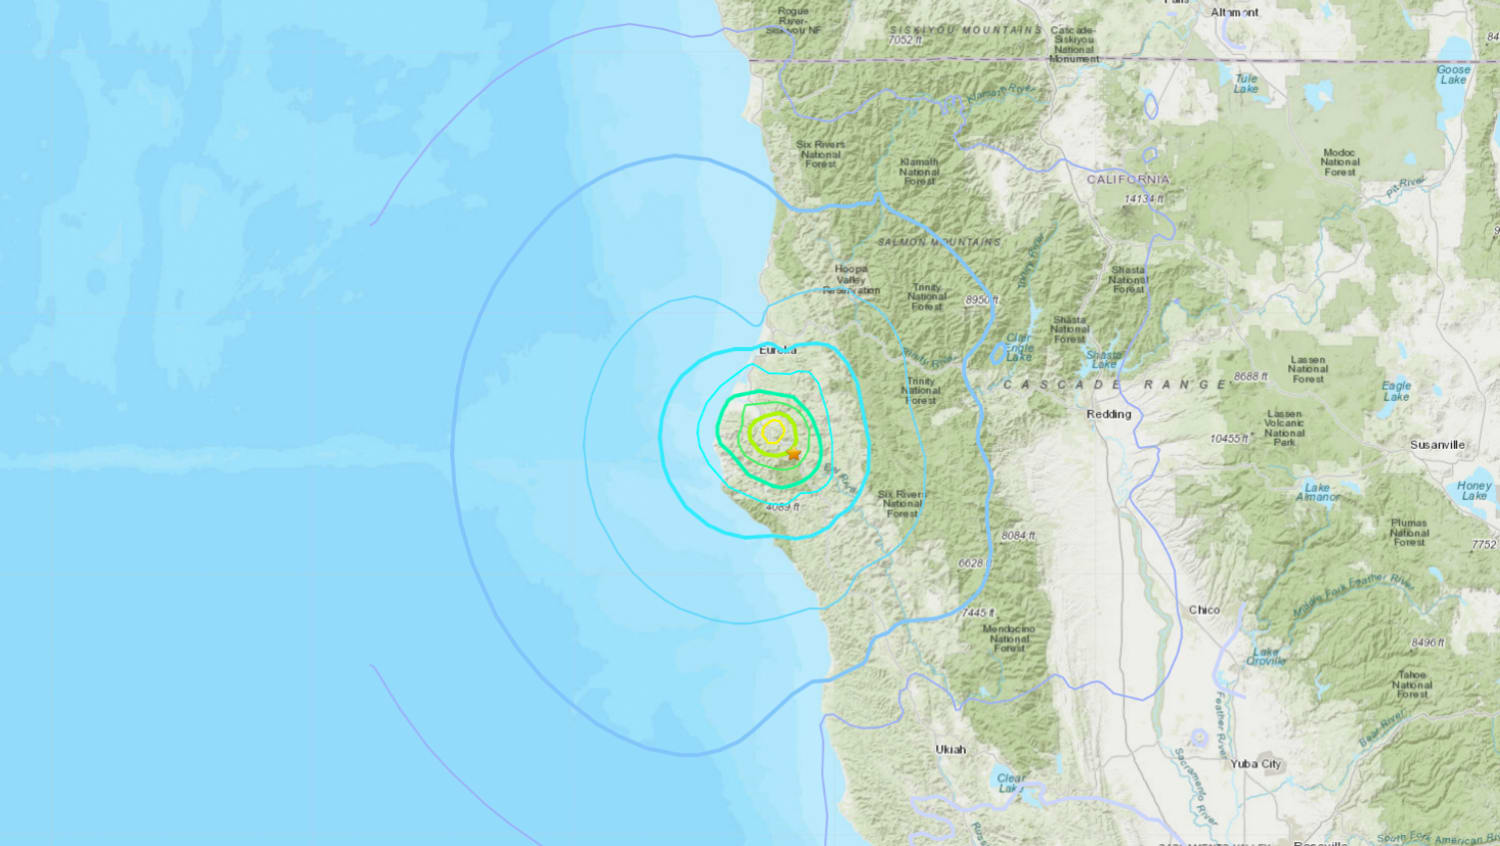 5.4 magnitude earthquake hits Northern California, causing outages and damages